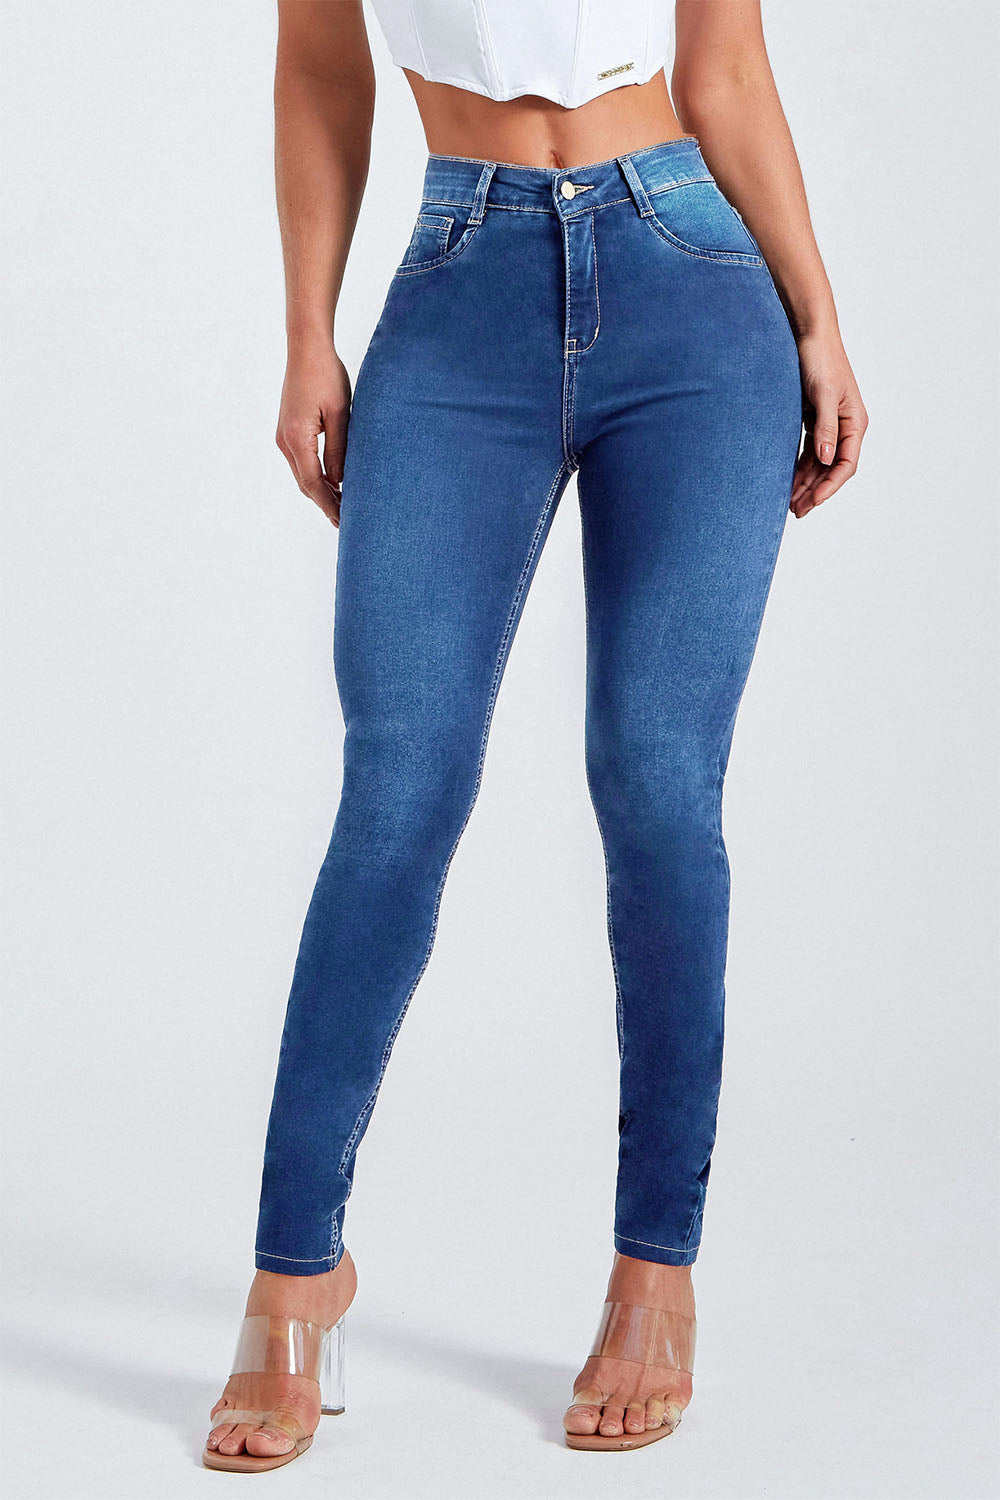 Buttoned Skinny Jeans - Bottoms - Pants - 4 - 2024